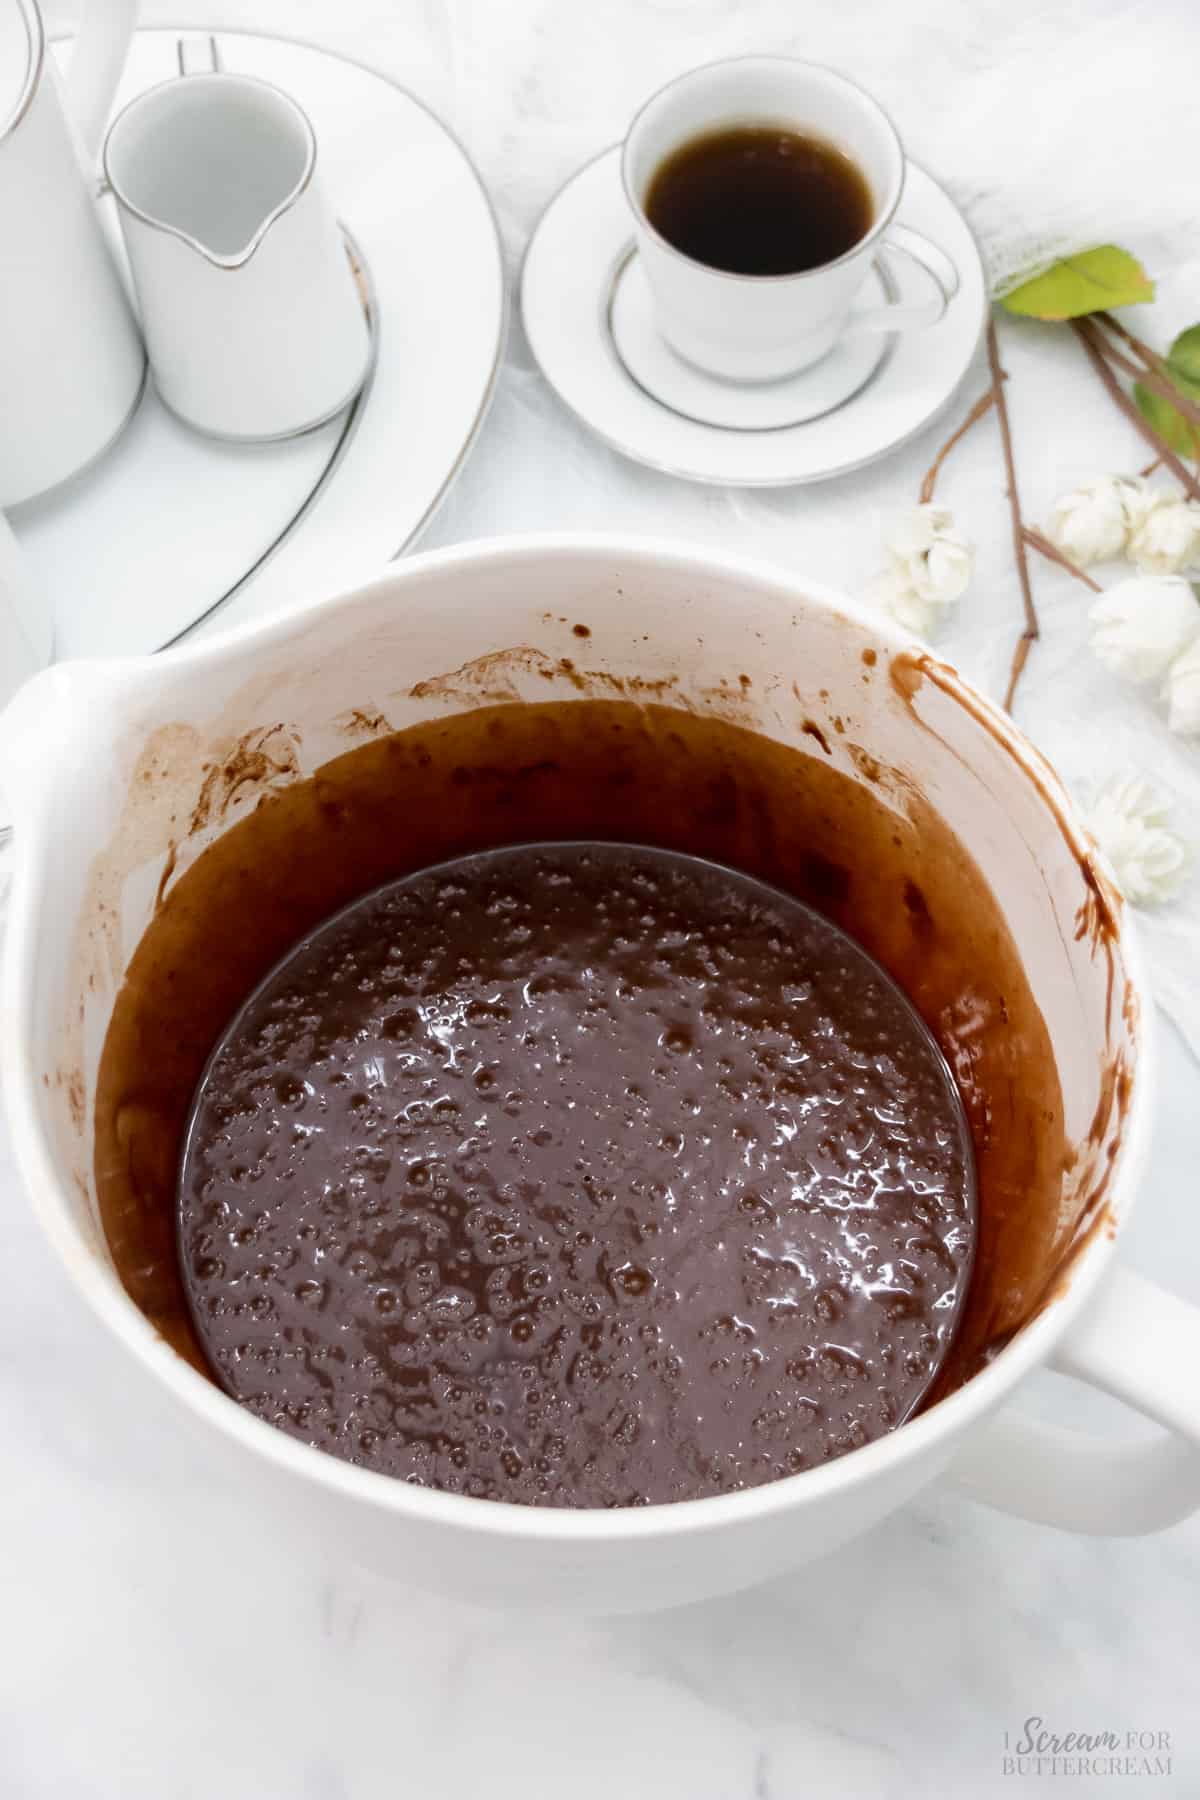 Chocolate cake batter in a large white mixing bowl.